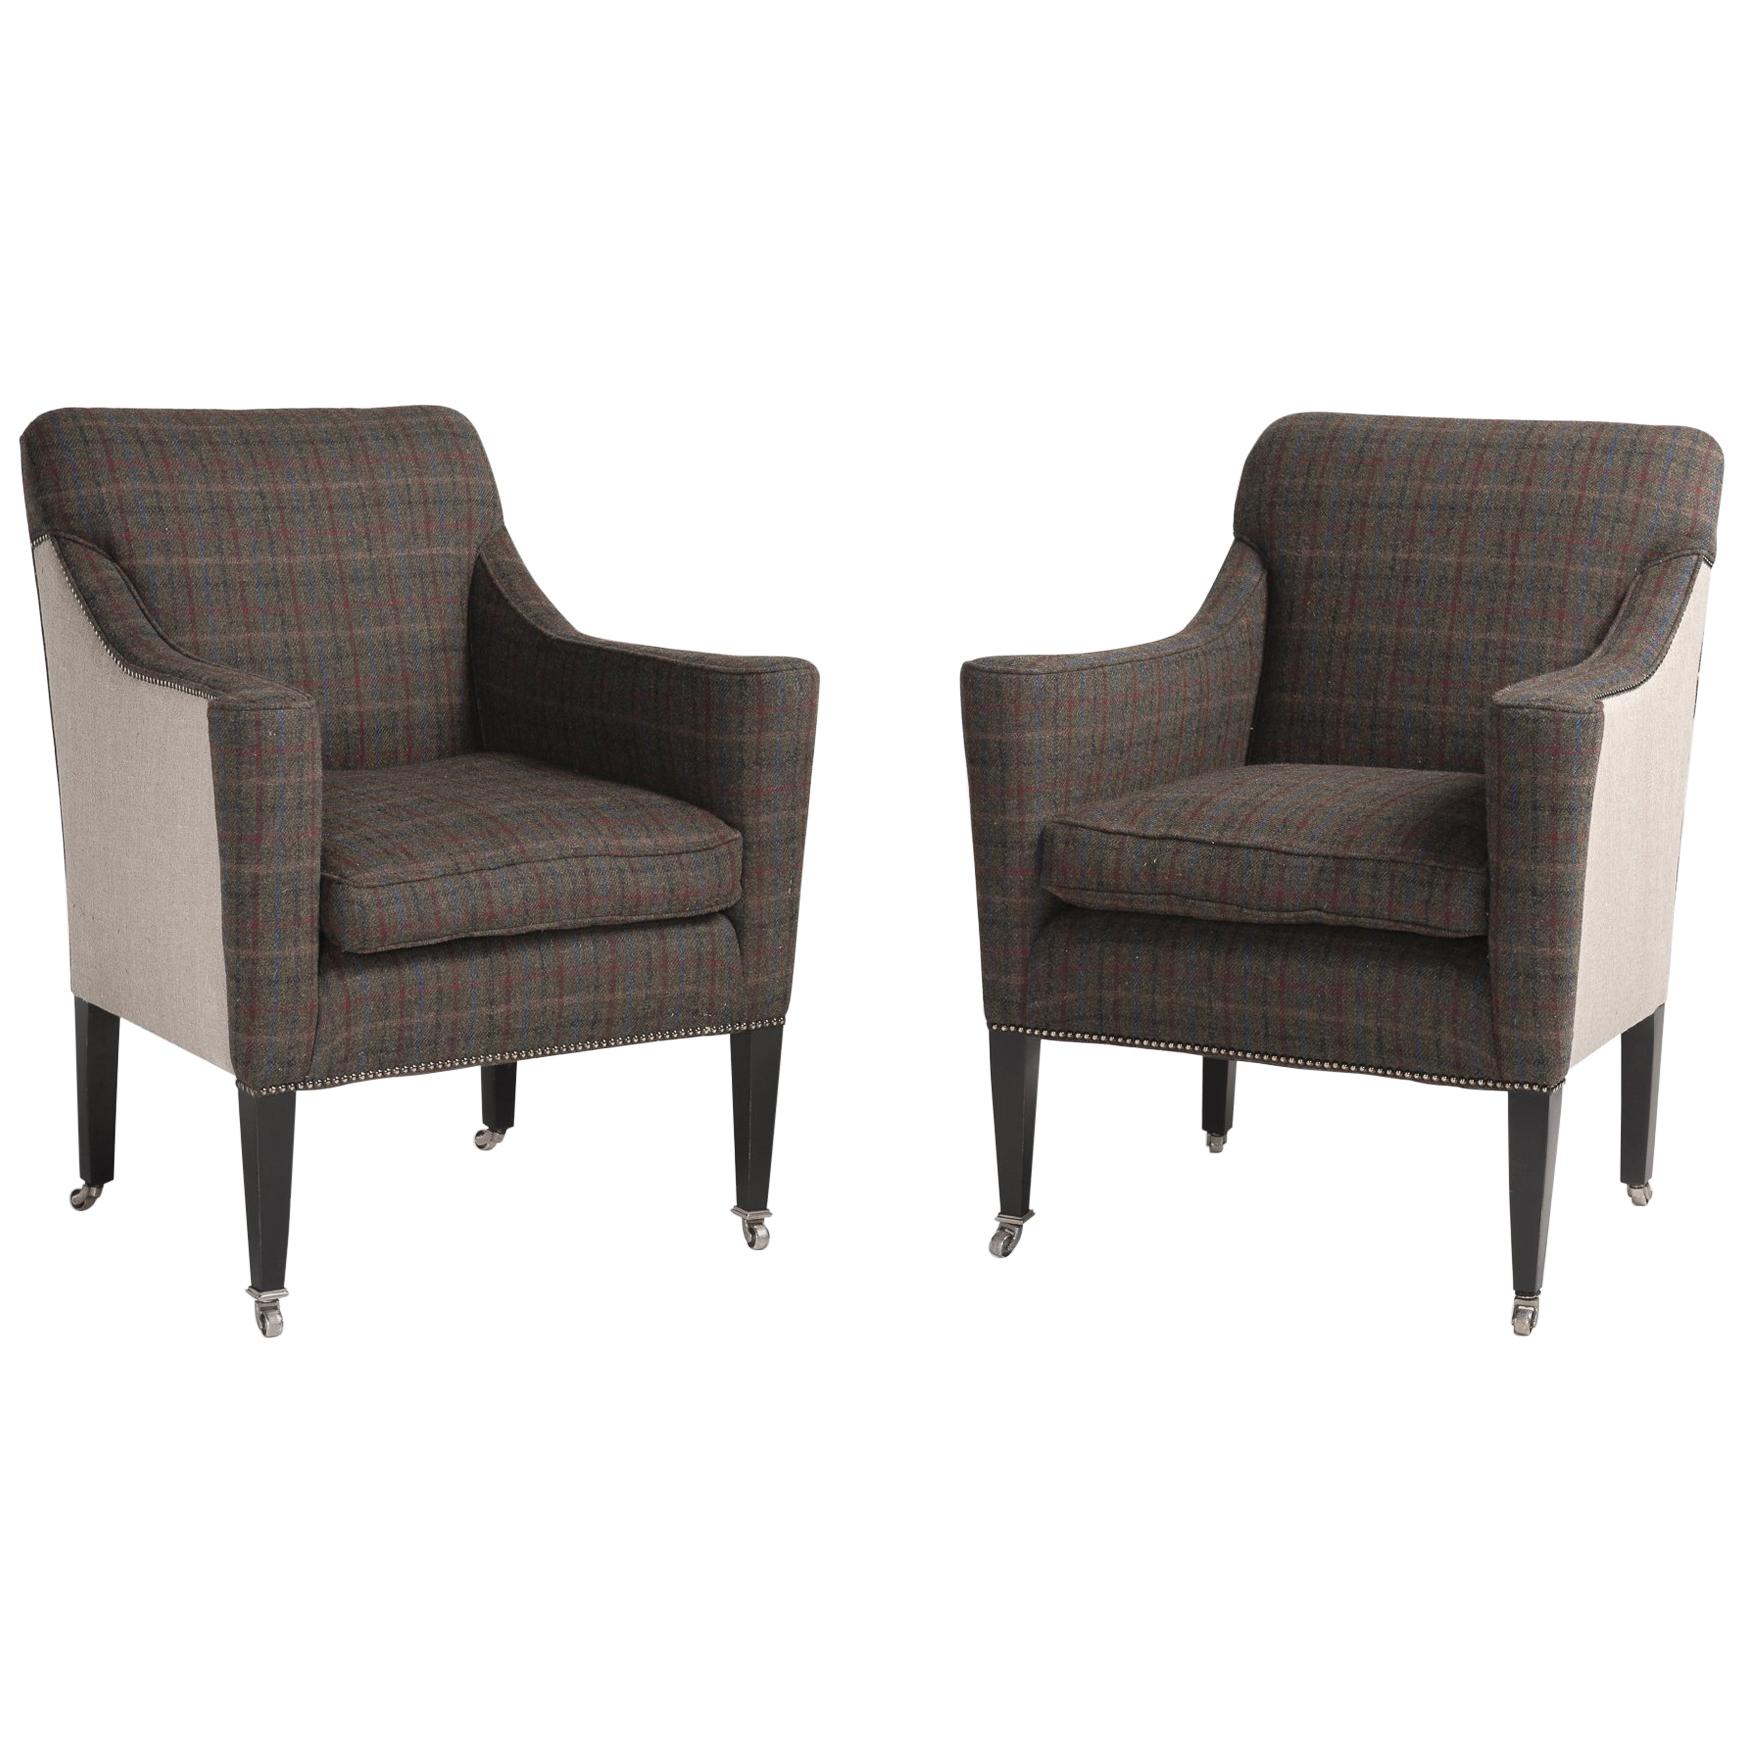 Pair of Art Deco Wool Flannel Armchairs, England, circa 1930